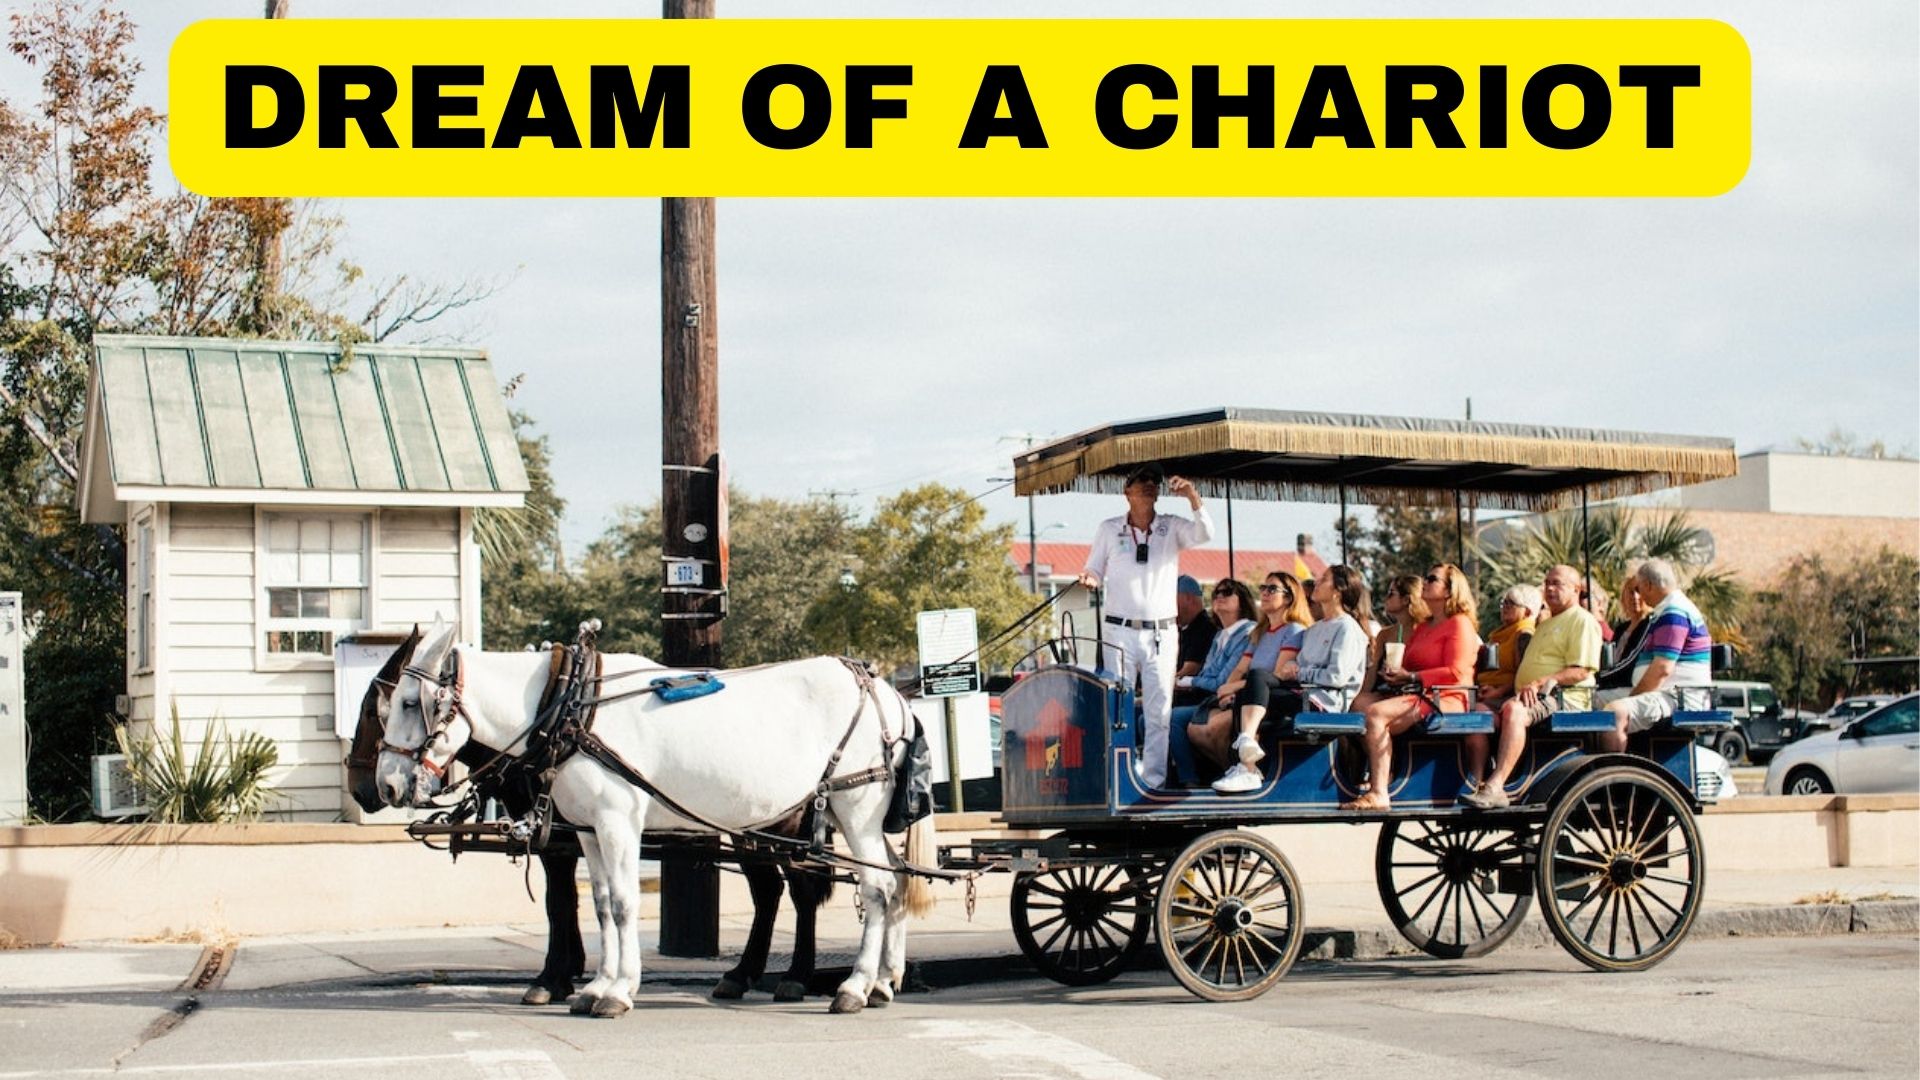 Dream Of A Chariot - It Represents Decision Making